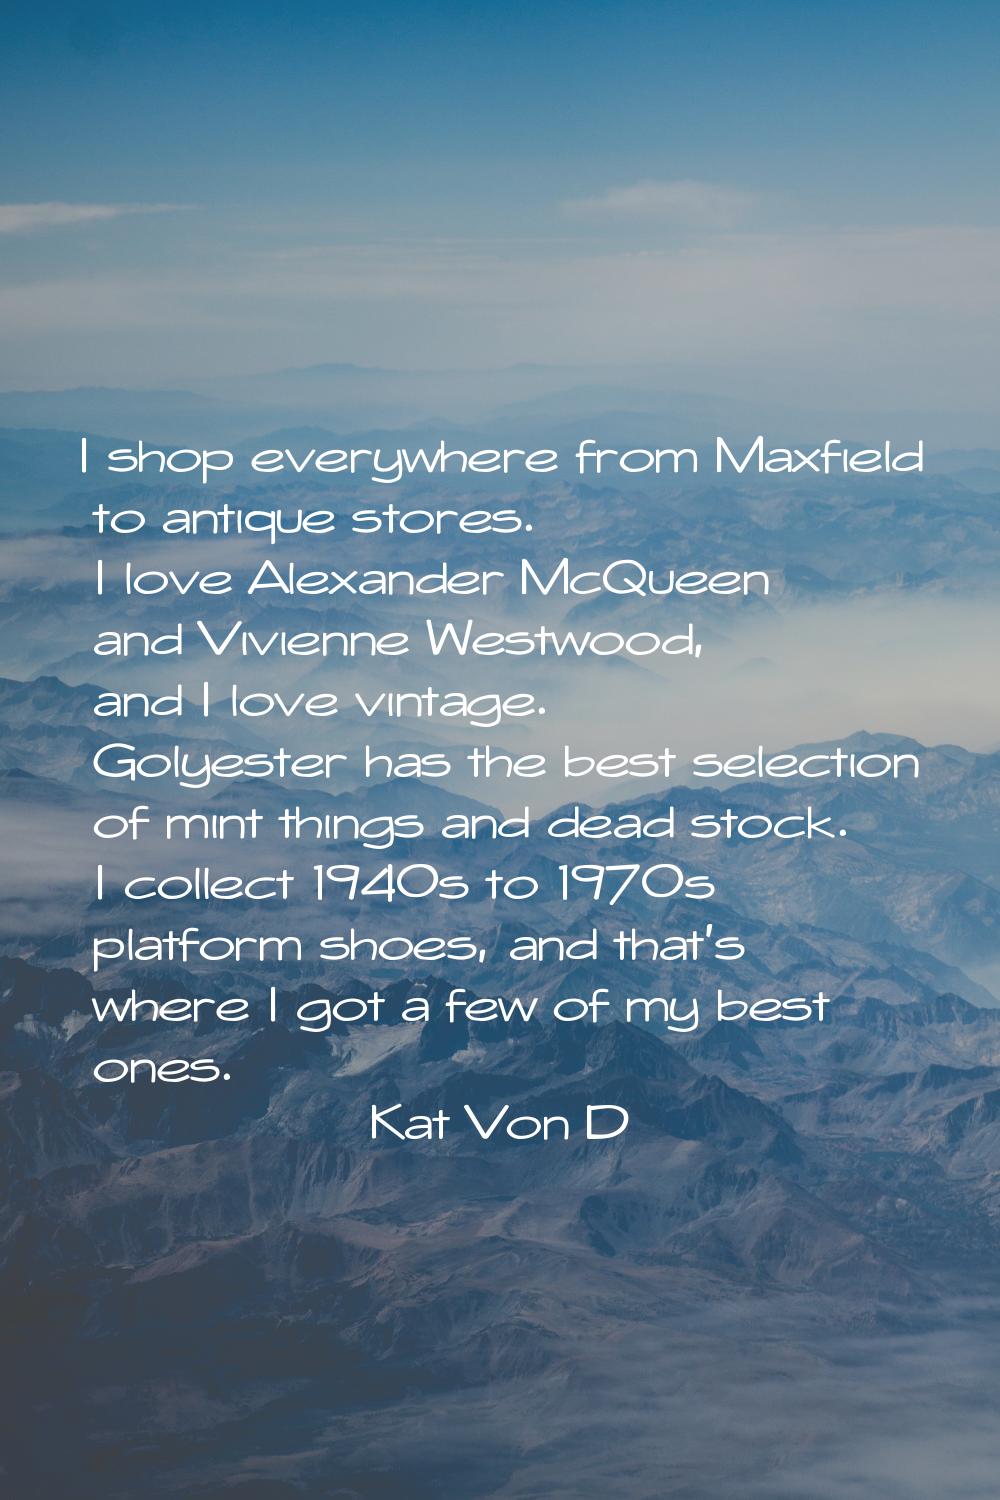 I shop everywhere from Maxfield to antique stores. I love Alexander McQueen and Vivienne Westwood, 